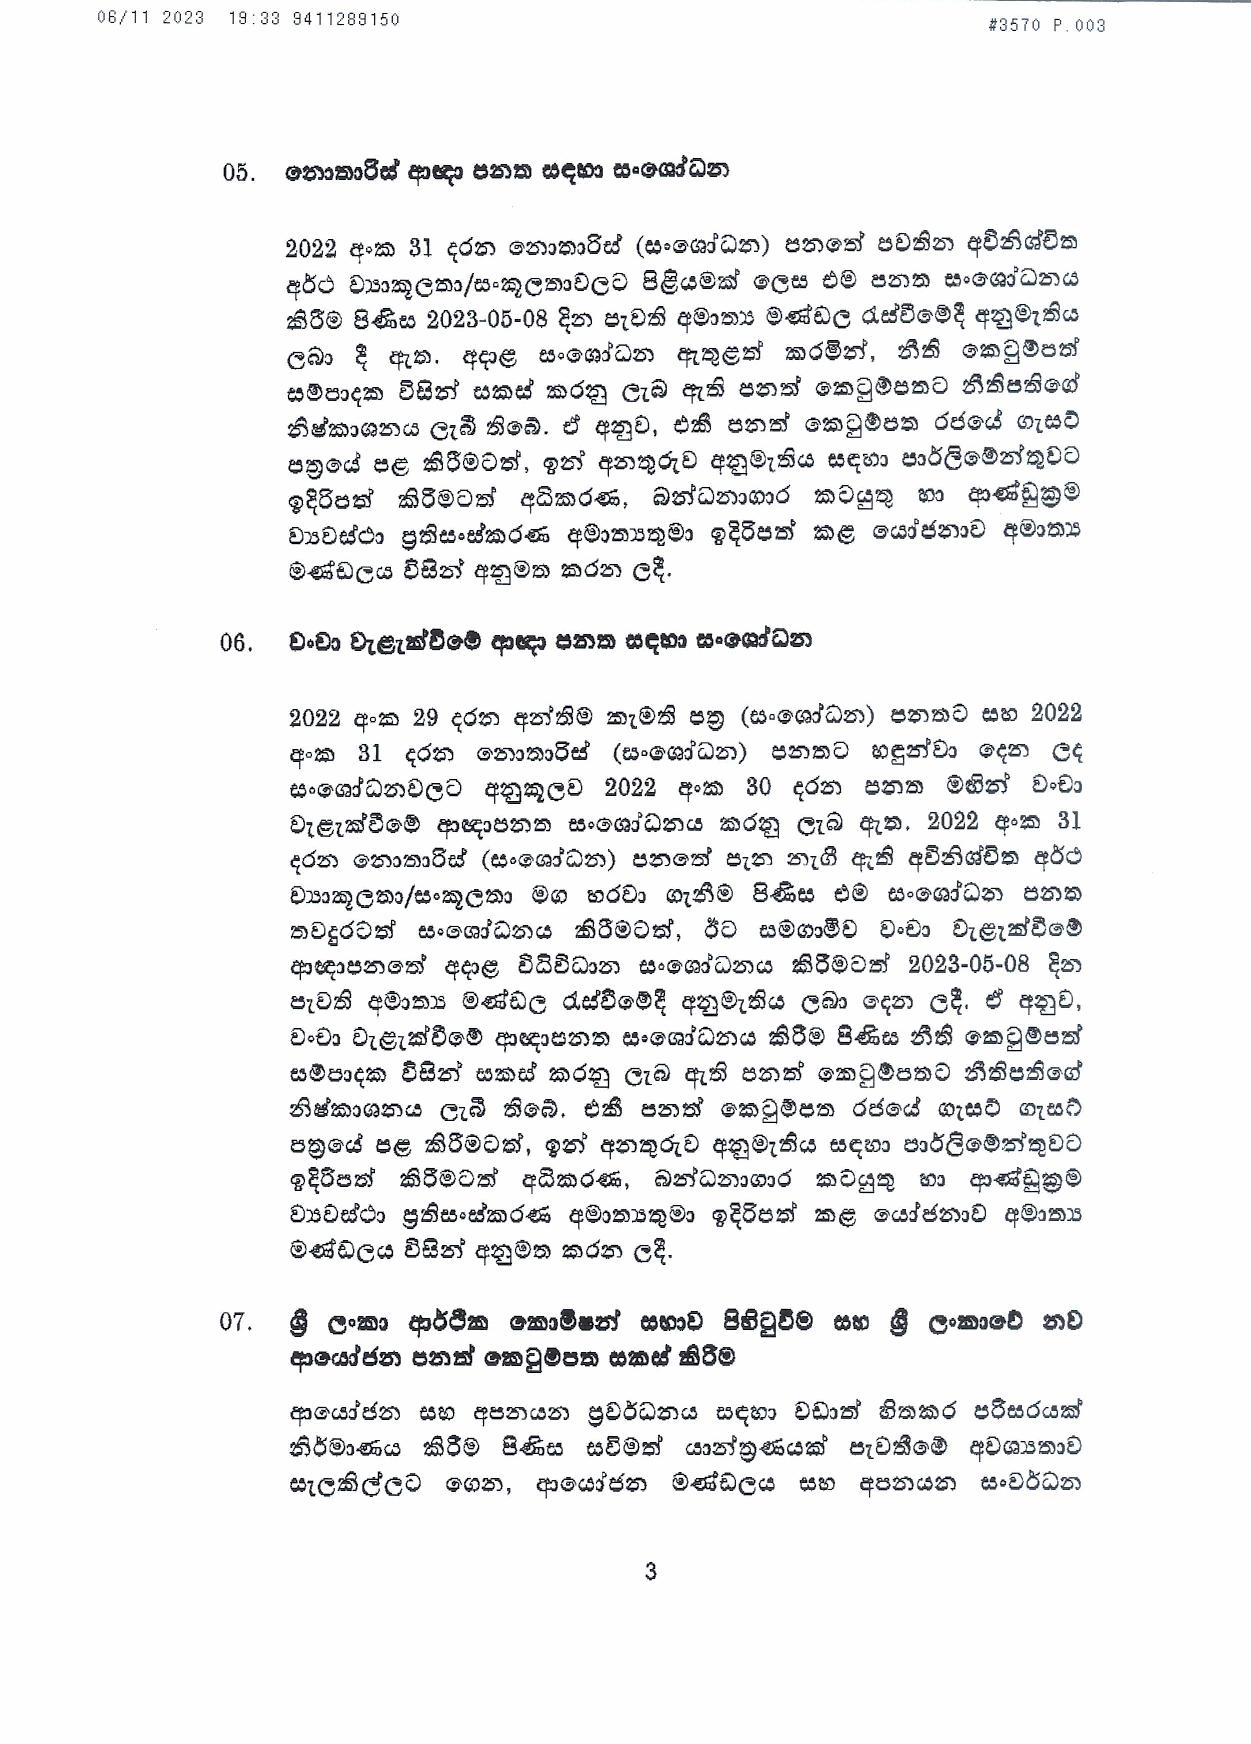 Cabinet Decision on 06.11.2023 1 page 003